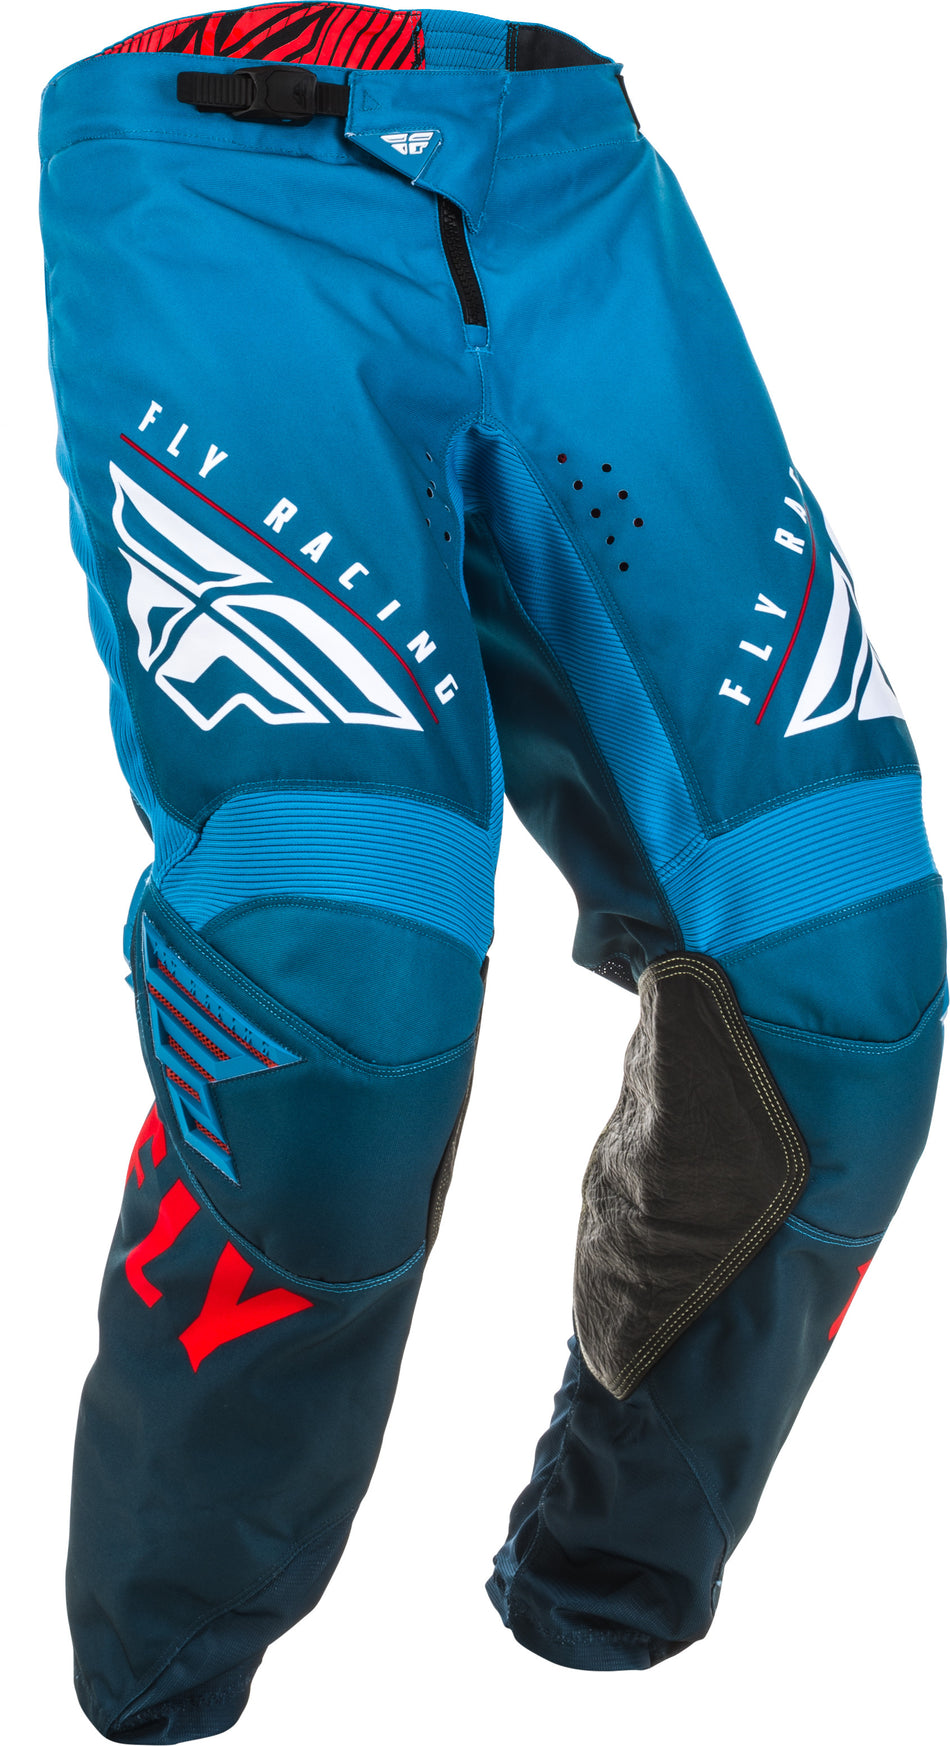 FLY RACING Kinetic K220 Pants Blue/White/Red Sz 26 373-53126